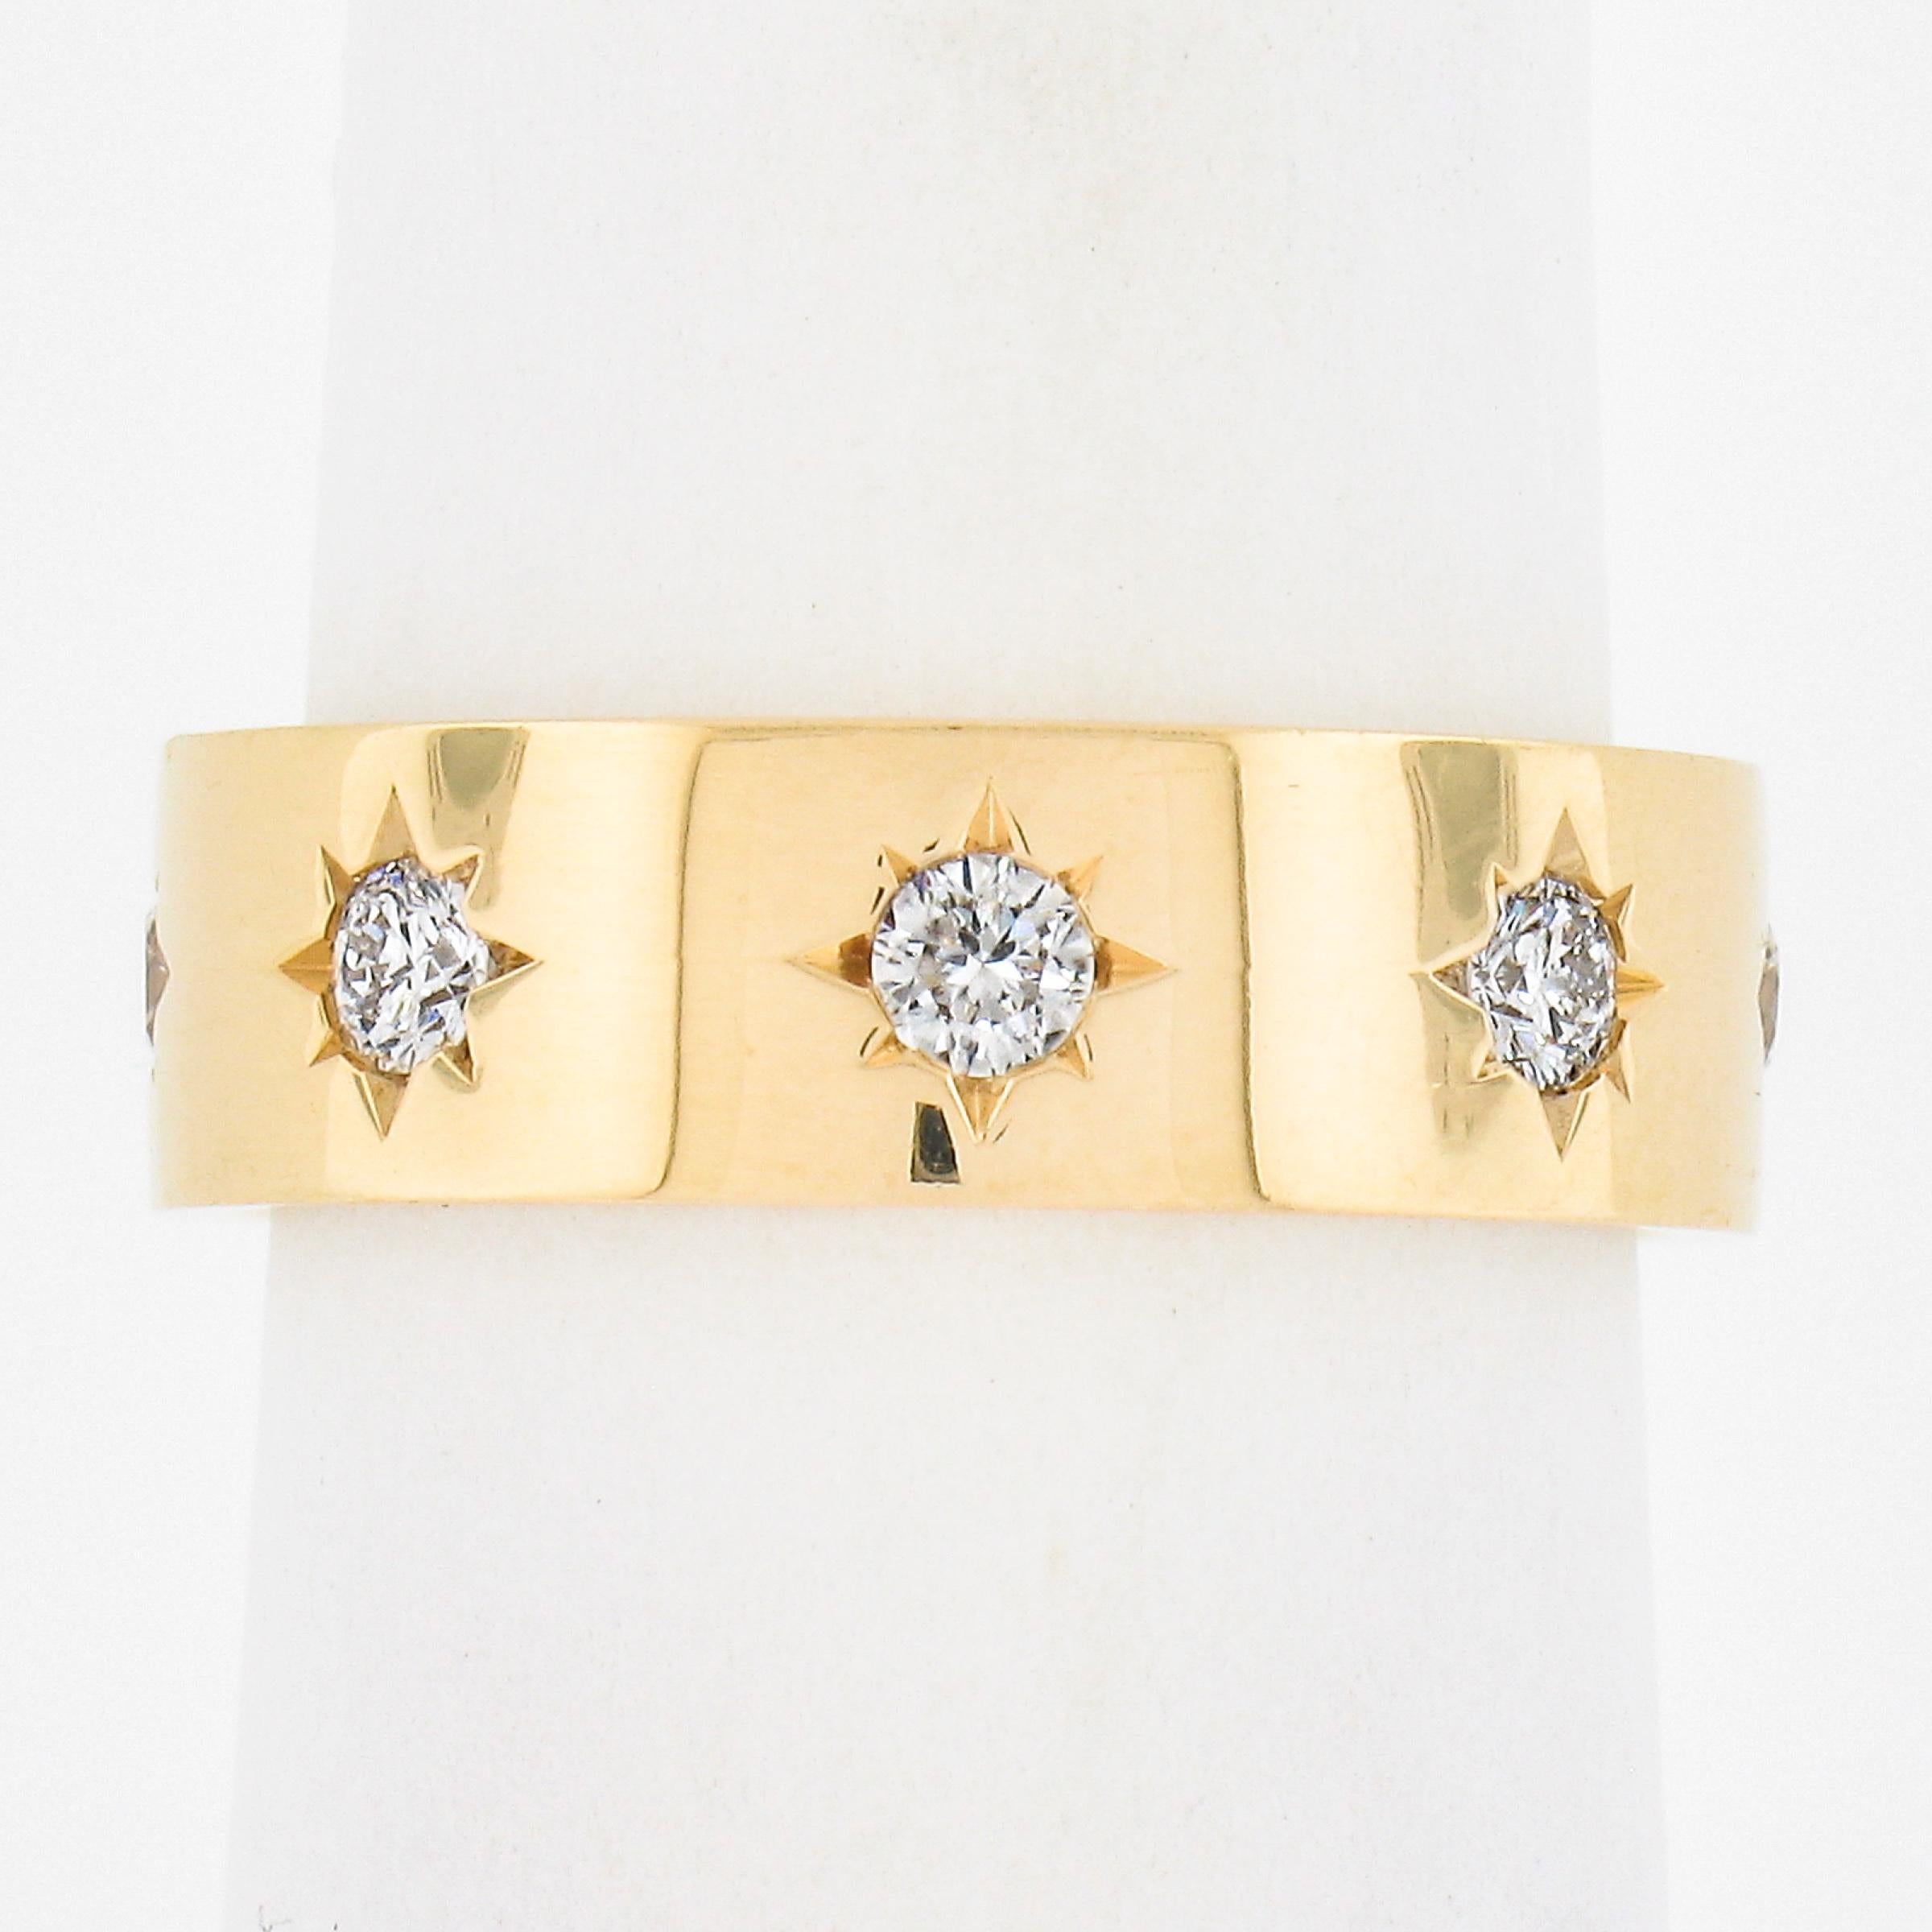 --Stone(s):--
(9) Natural Genuine Diamonds- Round Brilliant Cut - 8 Outside, 1 Inside - Star Pave Set - G/H Color - VS1-SI1 Clarity - 0.54ctw (approx.)

Material: Solid 18k Yellow Gold
Weight: 6.96 Grams
Ring Size: 5.5 (Fitted on a finger. We CANNOT